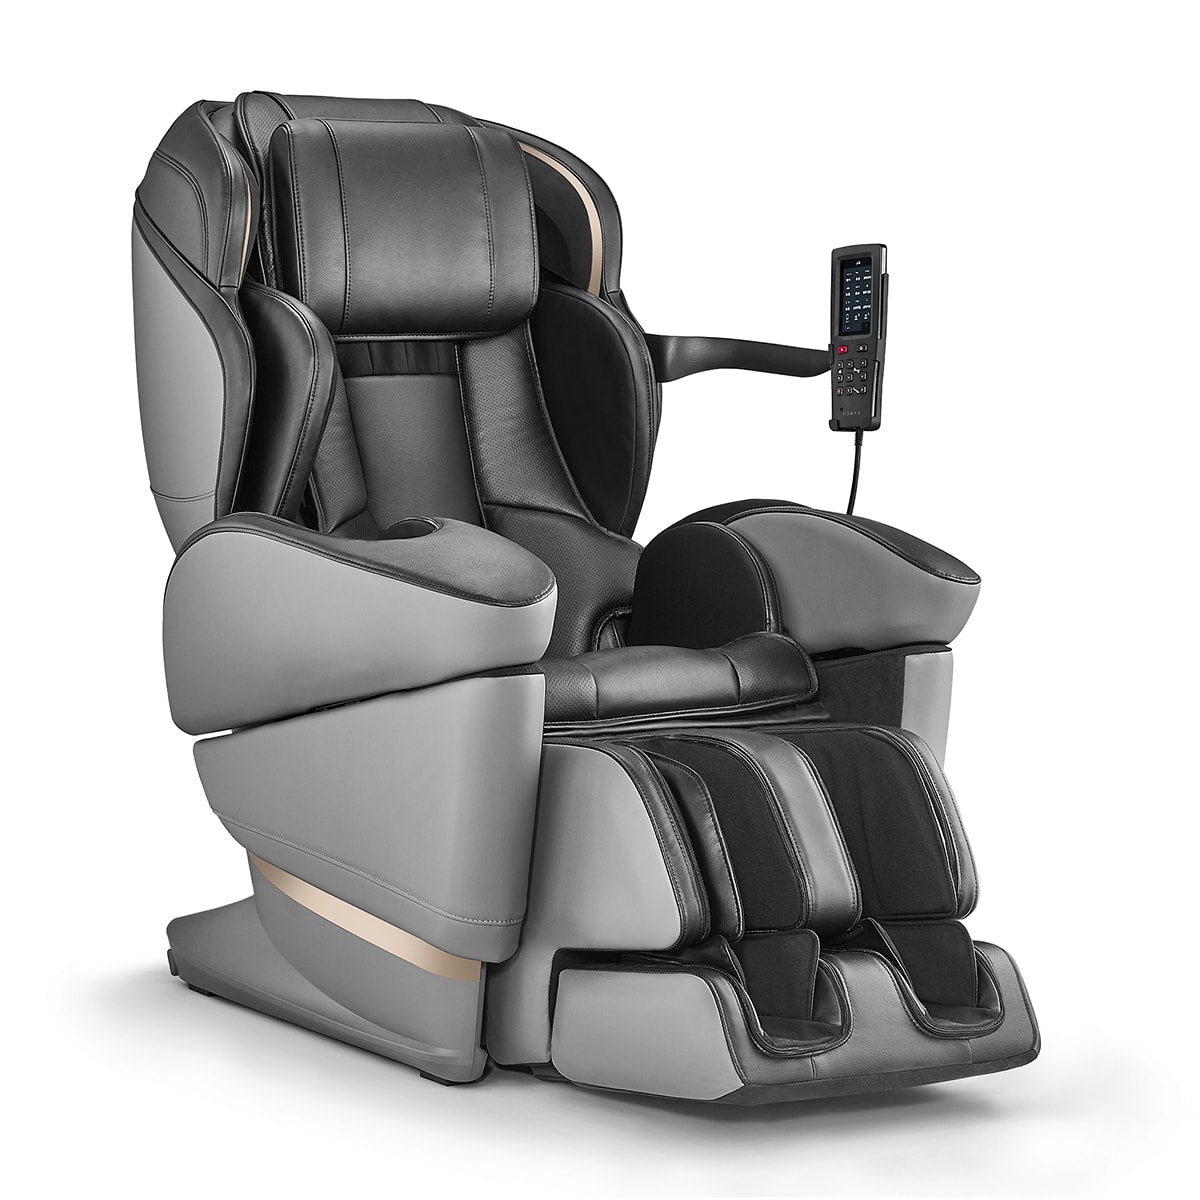 Synca JP3000 Massage Chair